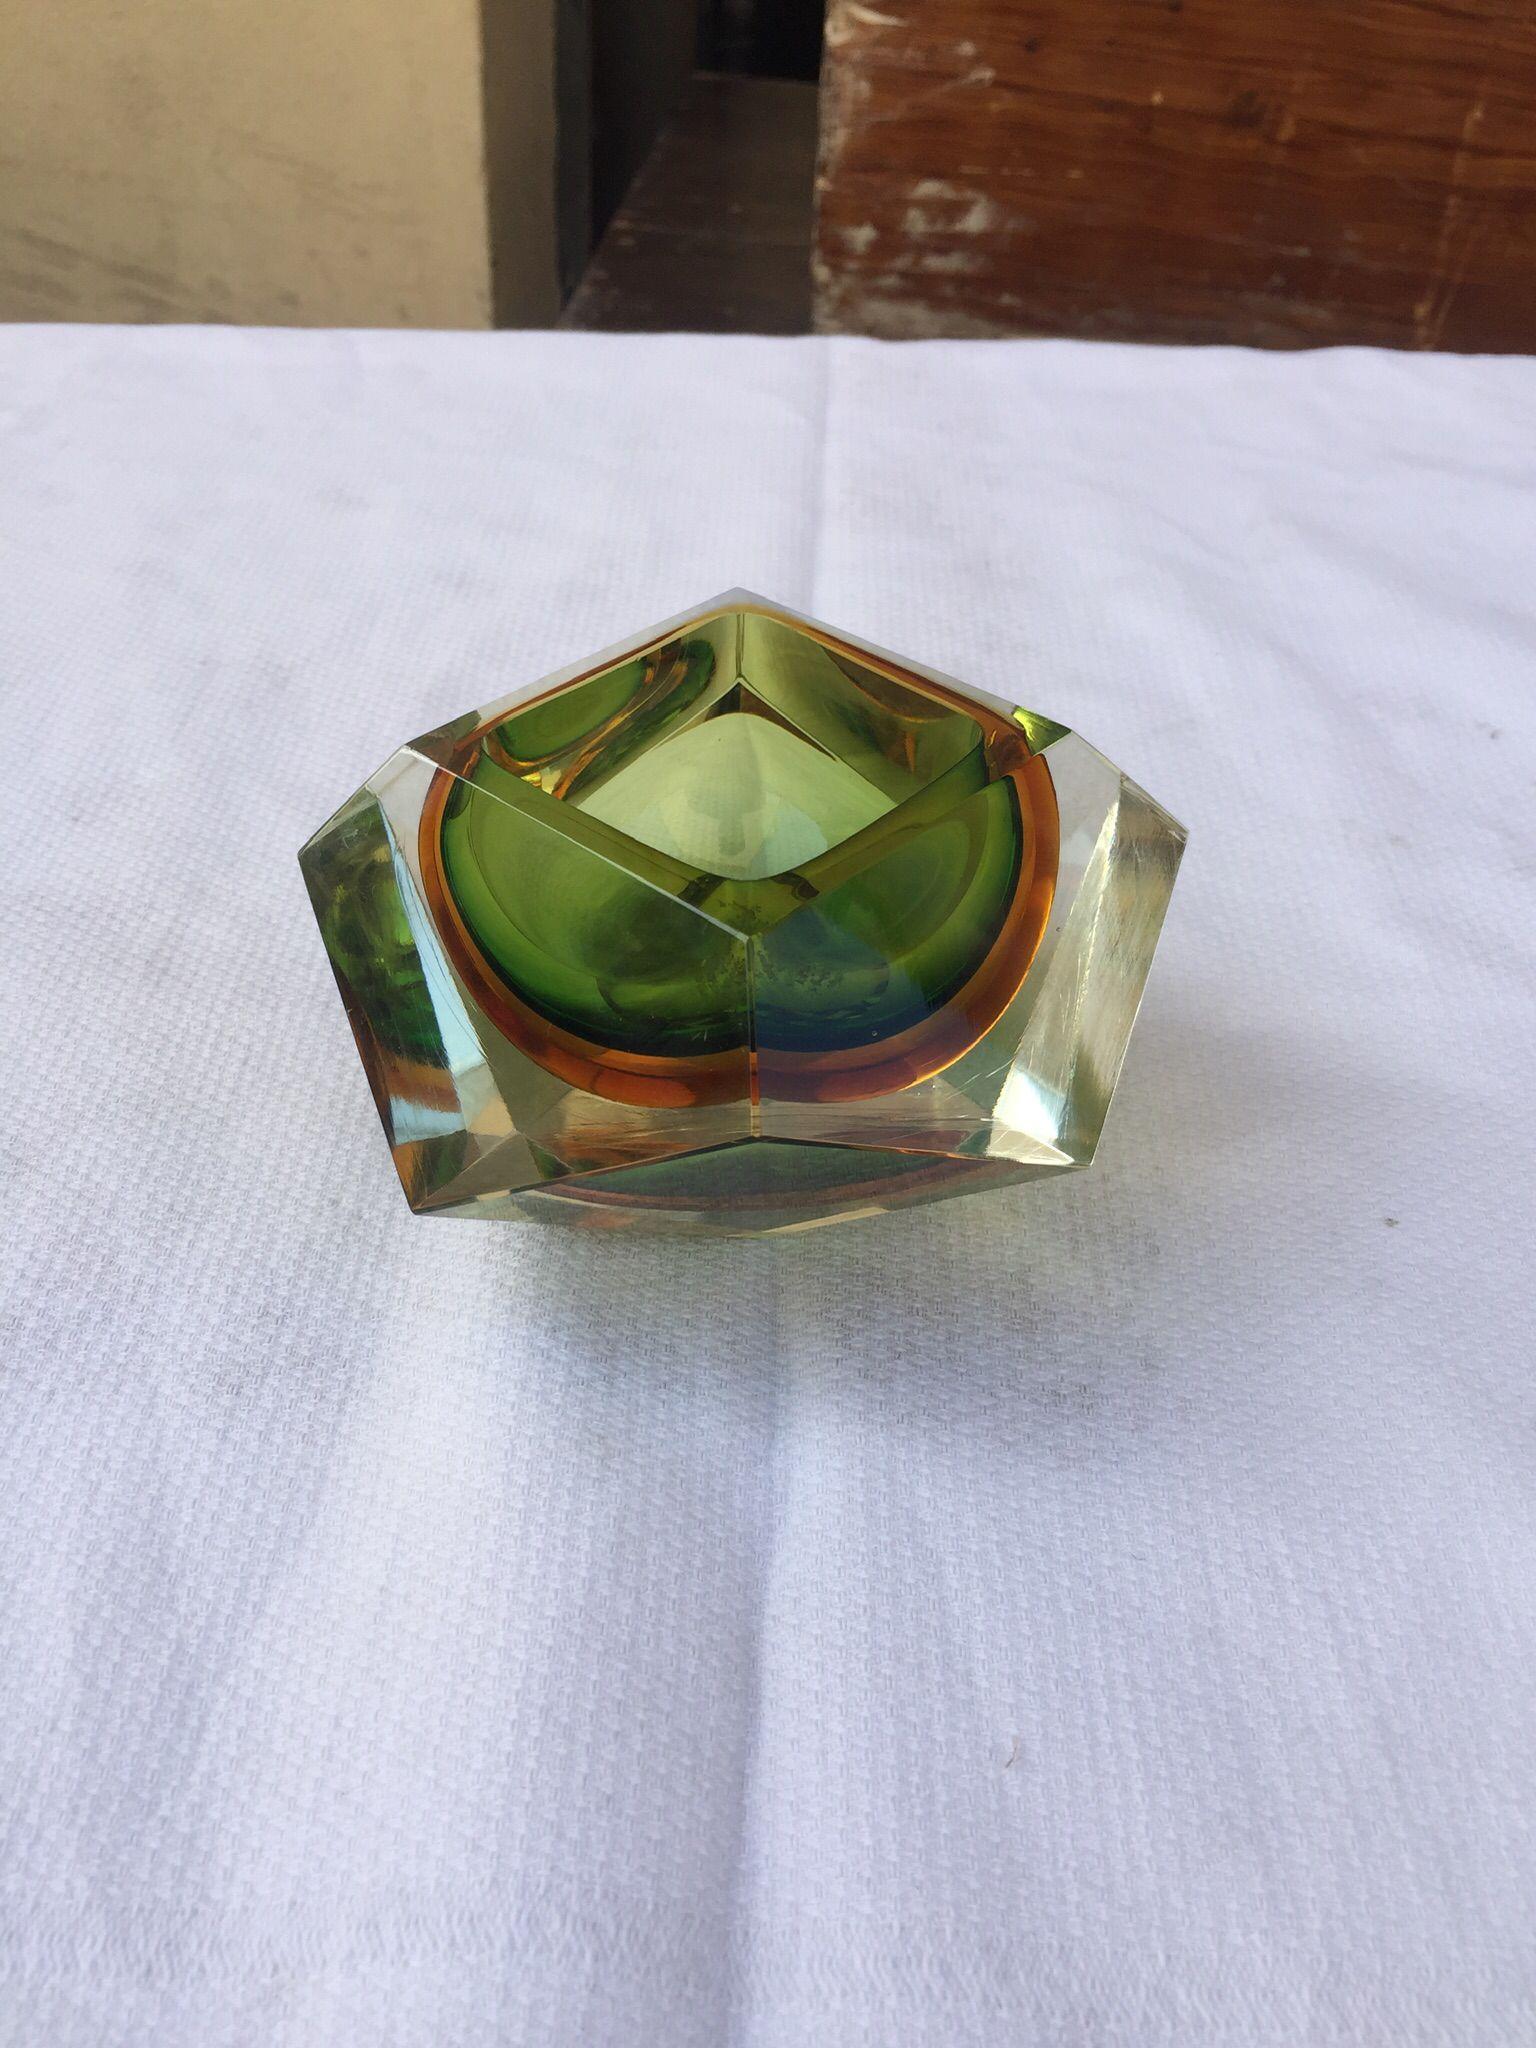 Murano ashtray, By Flavio Poli for Seguso, Vetro Sommerso. Green and yellow faceted glass, Italy, 1950s.